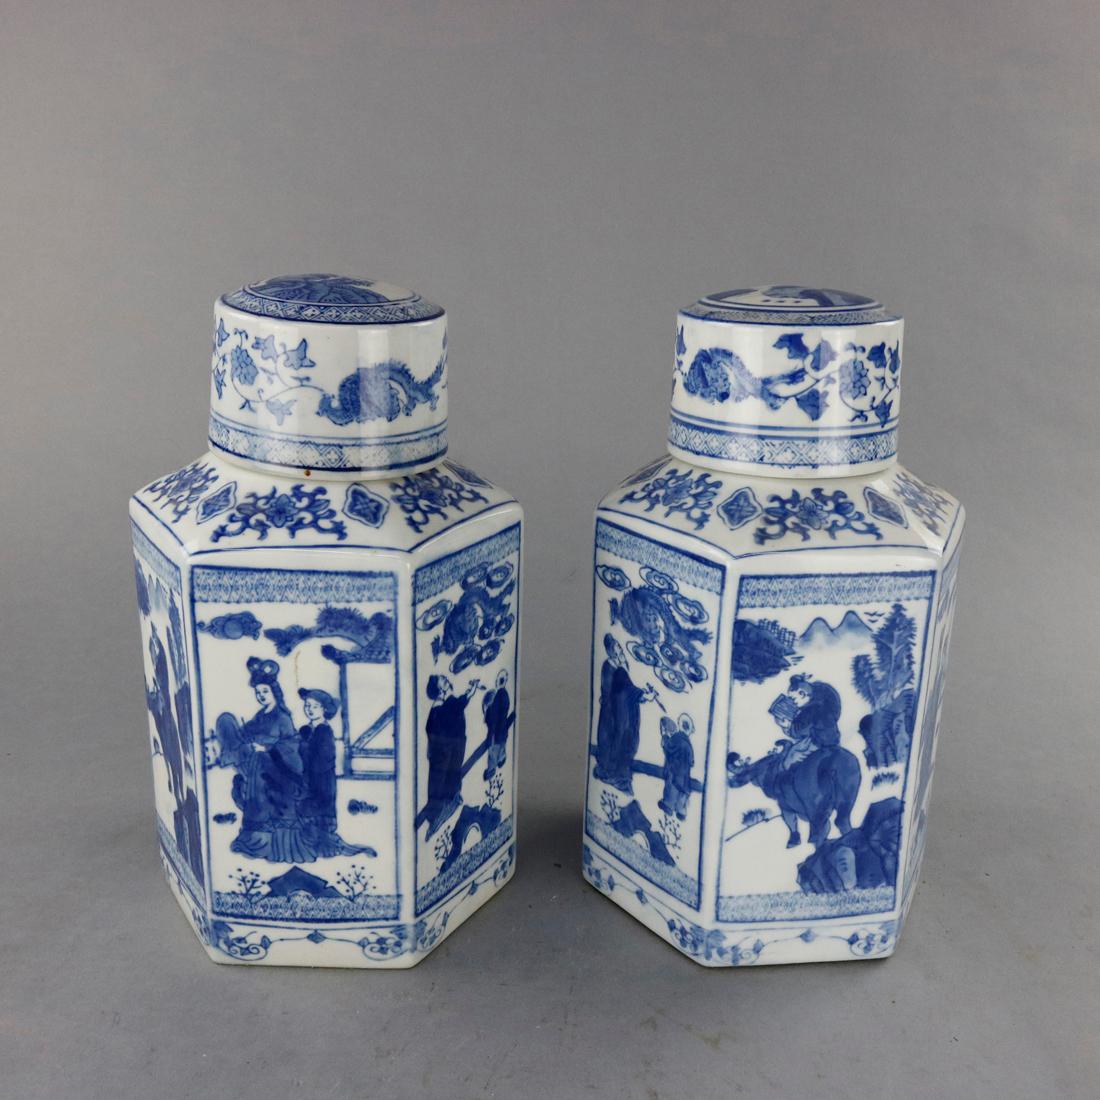 Fired Vintage Pair Chinese Porcelain Canton School Blue & White Ginger Jars, 20th C